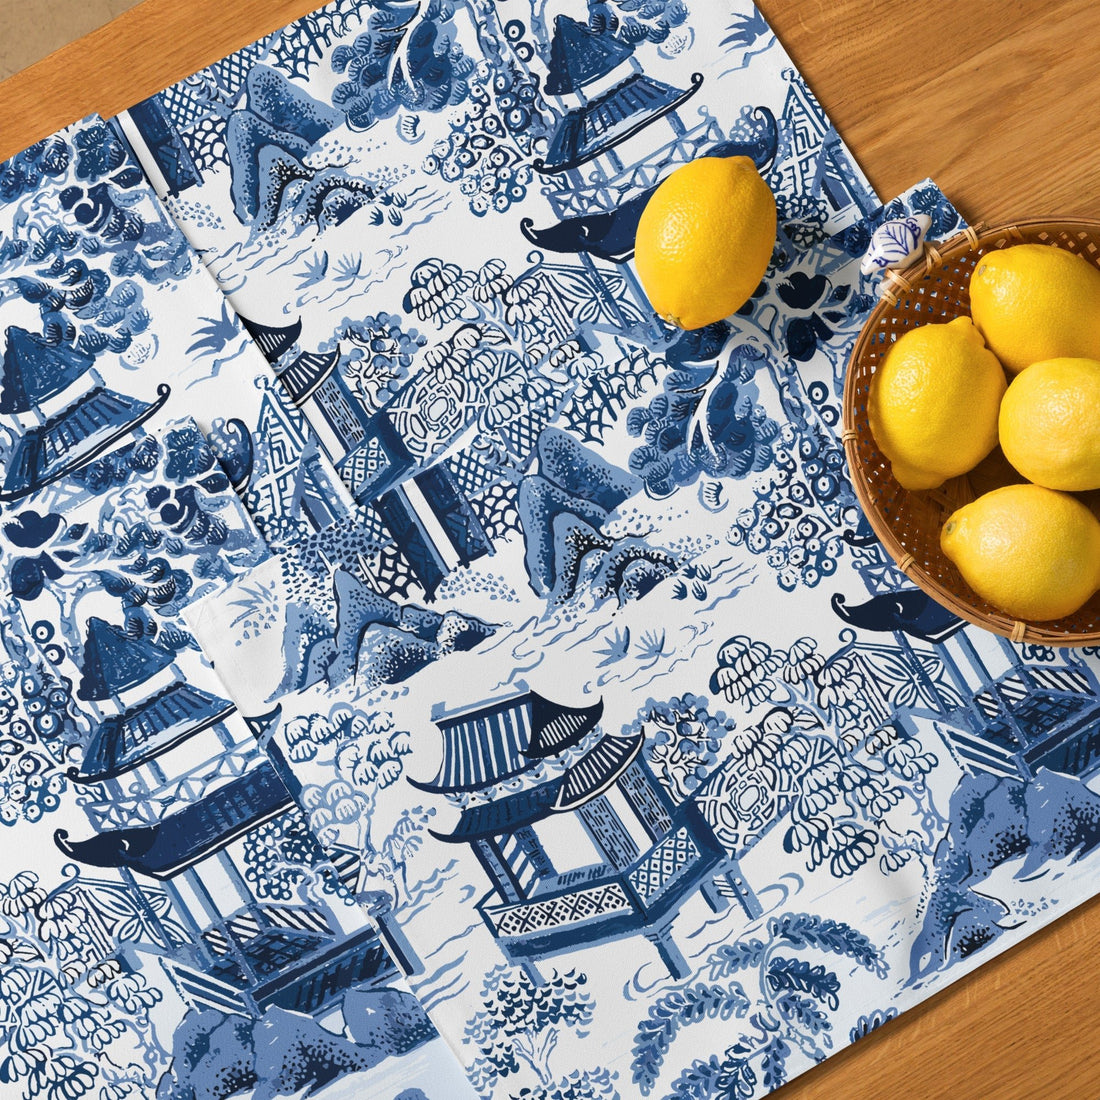 Kate McEnroe New York Chinoiserie Blue and White Placemats Set of 4, Traditional Asian Pagodas and Cherry Blossoms Porcelain Design Table MatsPlacemats8697237_17484